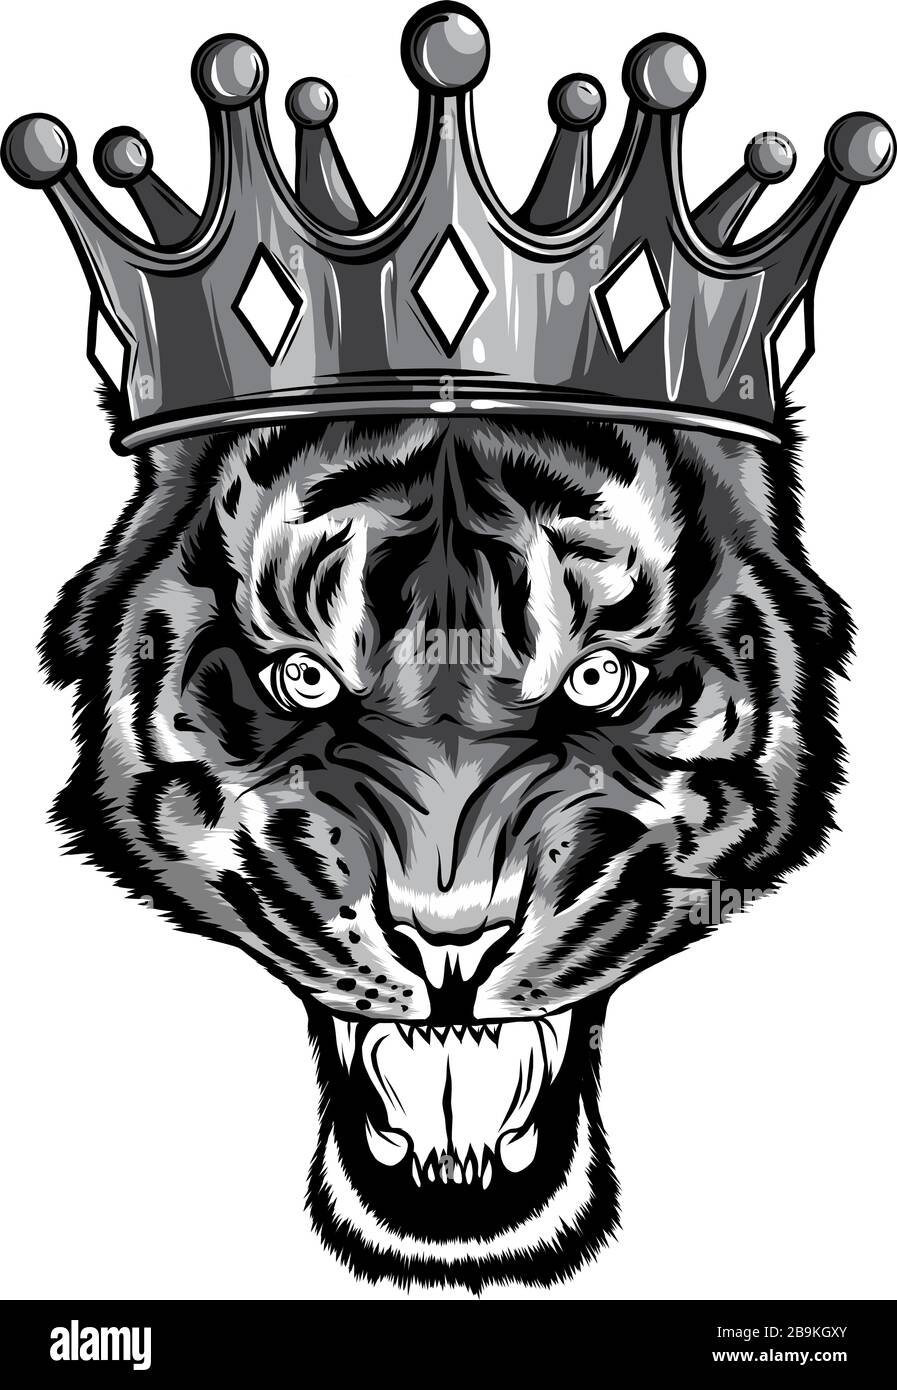 Hand drawn portrait of Tiger with crown. Vector Stock Vector